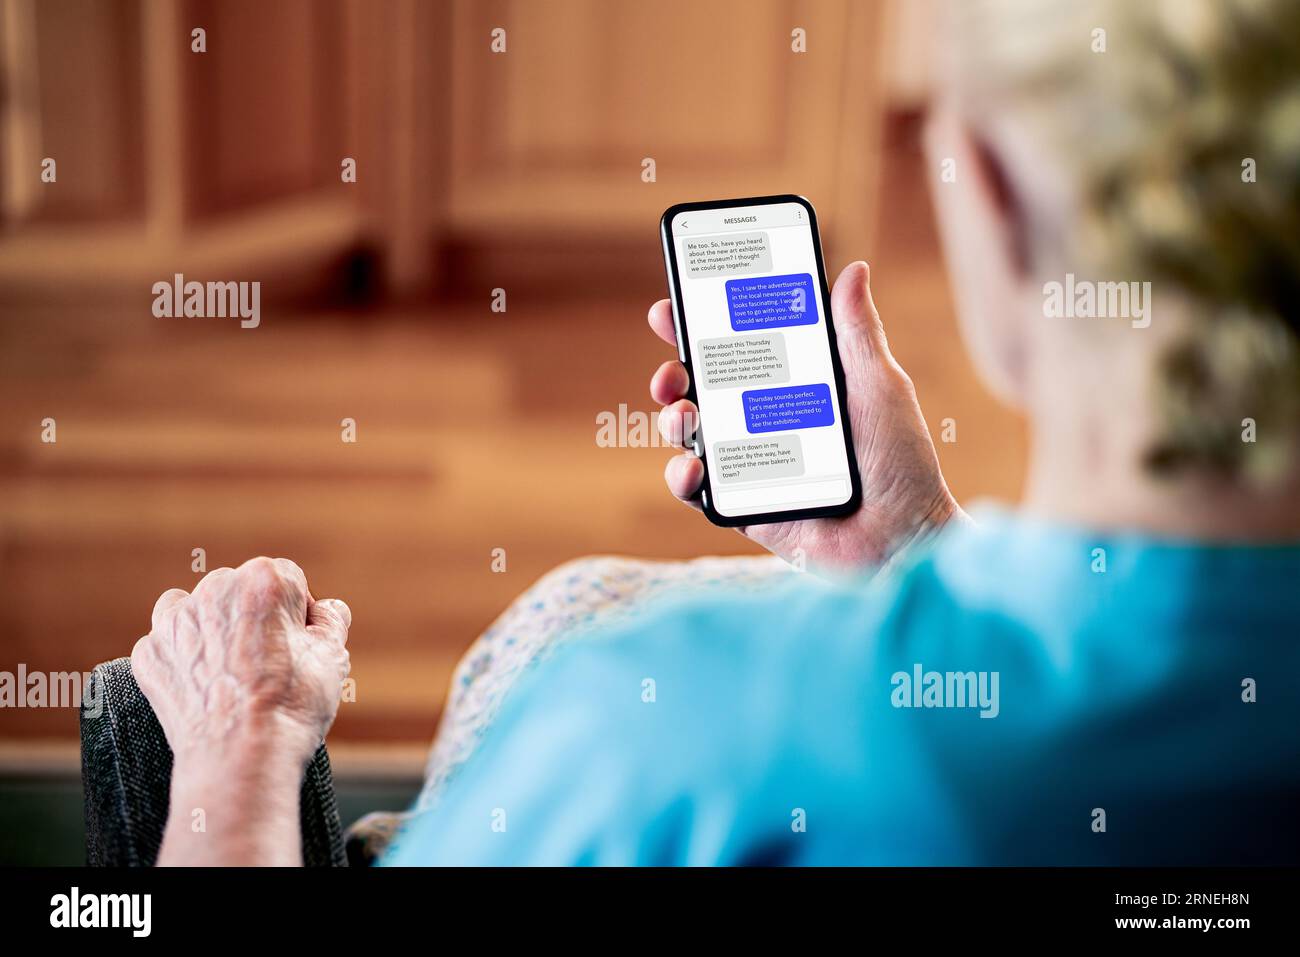 Text or chat messages in phone. Elder senior mature woman sms texting with friend or family. Old lady with cellphone messaging app. Stock Photo